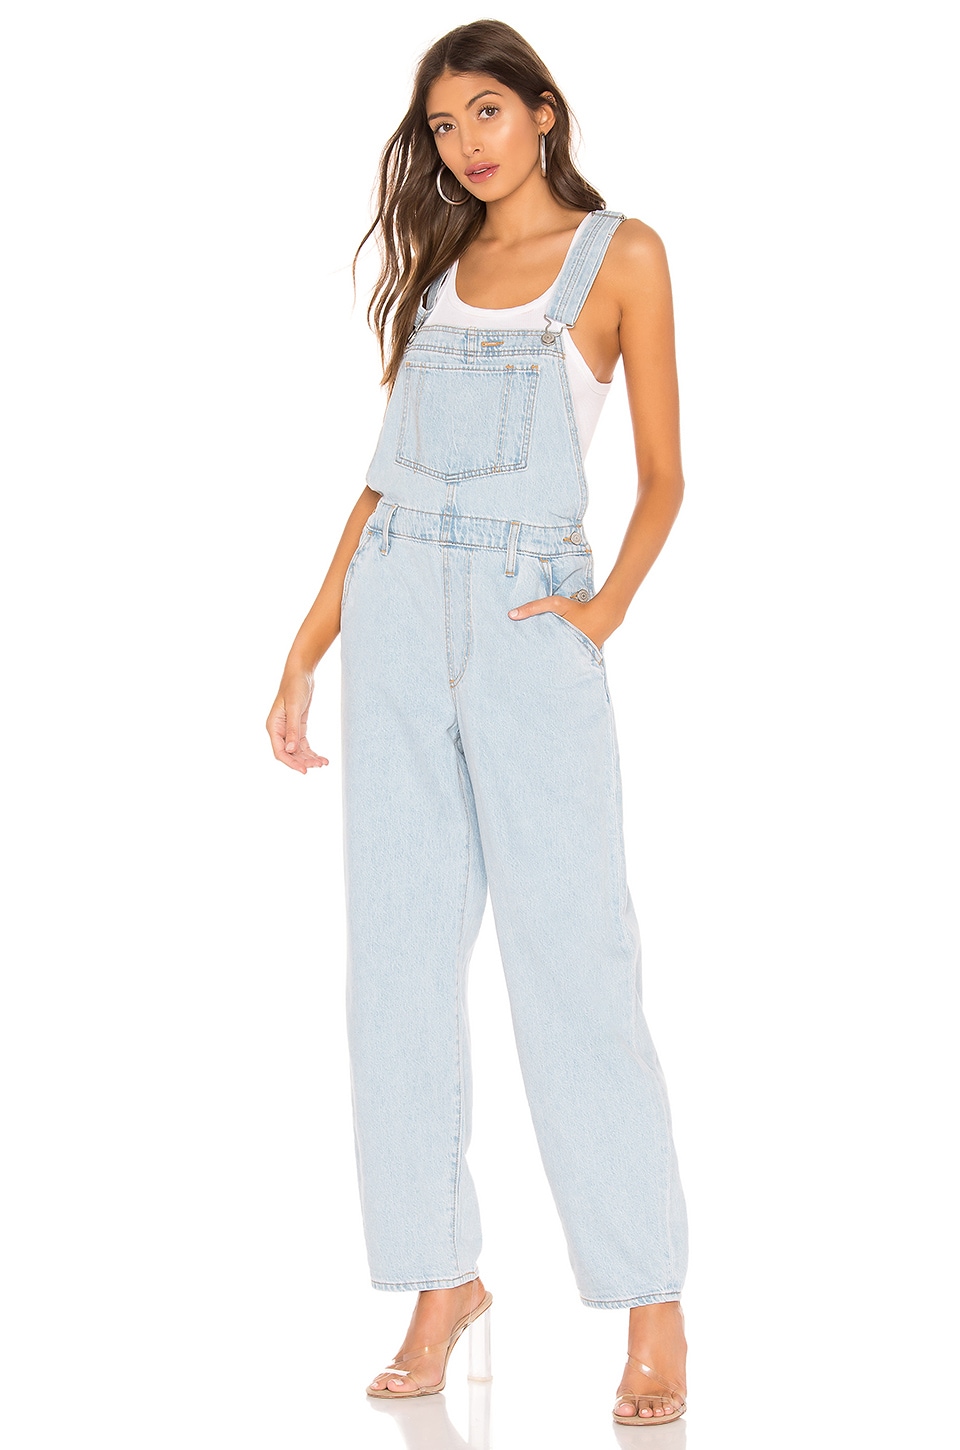 LEVI'S Baggy Overall in Big and Smalls | REVOLVE